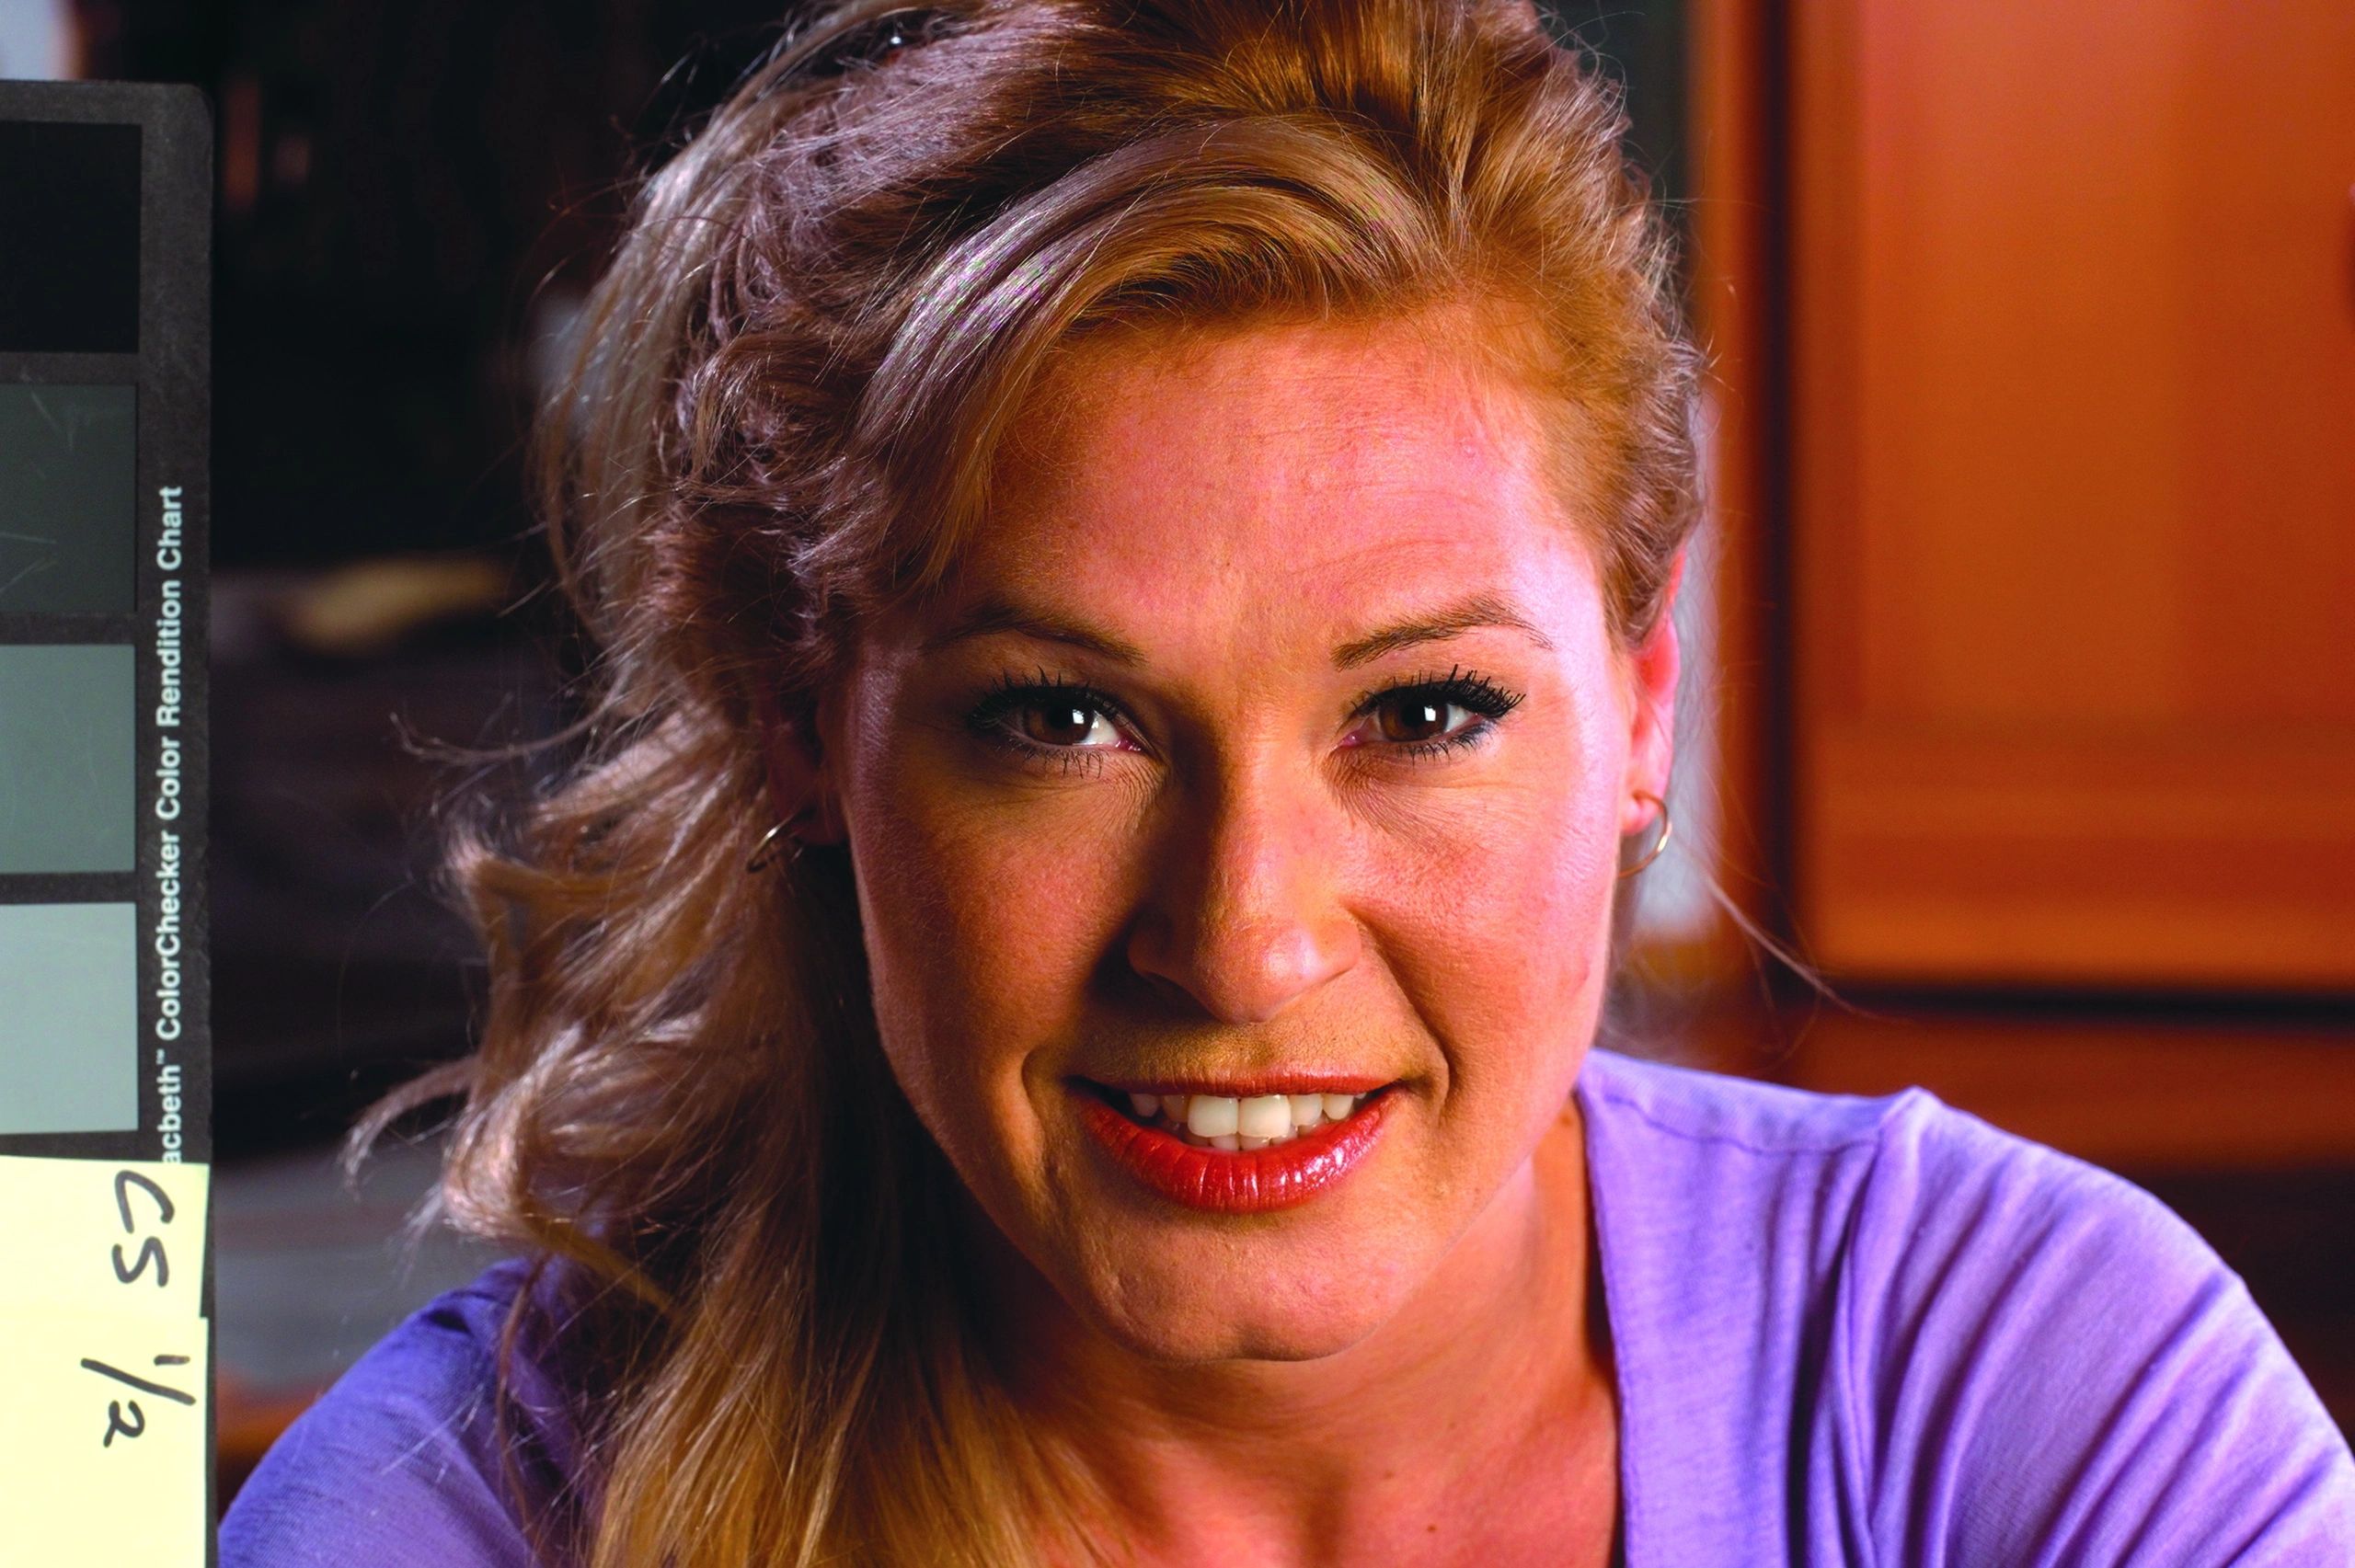 Close-up portrait of a smiling woman with blonde hair wearing a purple shirt, indoors with soft lighting.